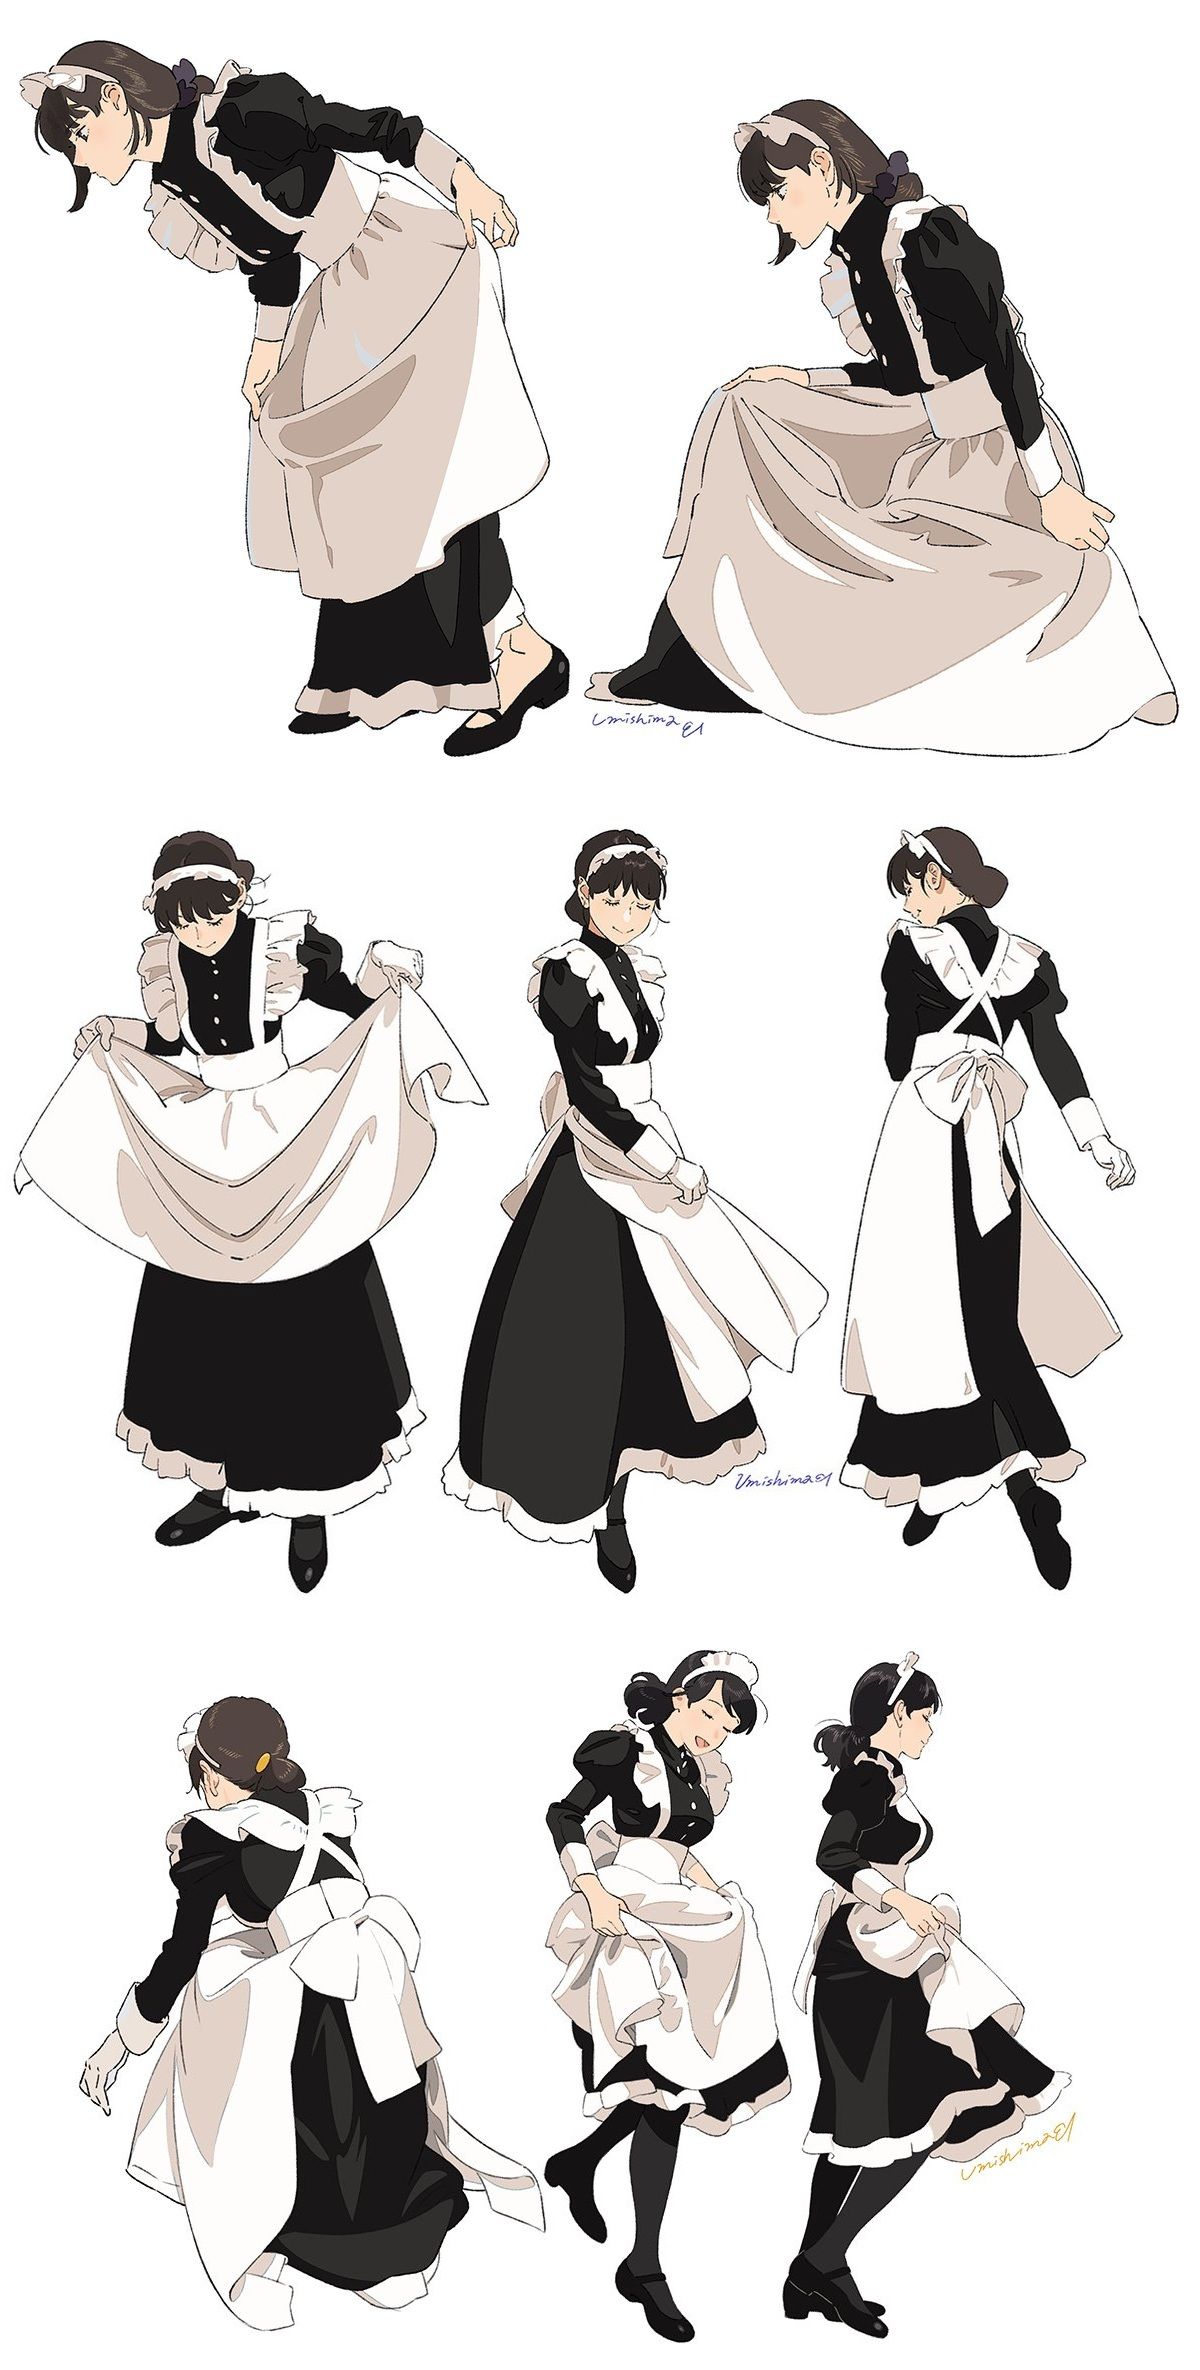 Anime Maid Outfits Drawing Pin By Sora Rui On Chibi Anime Dress Anime Outfits Art Clothes 